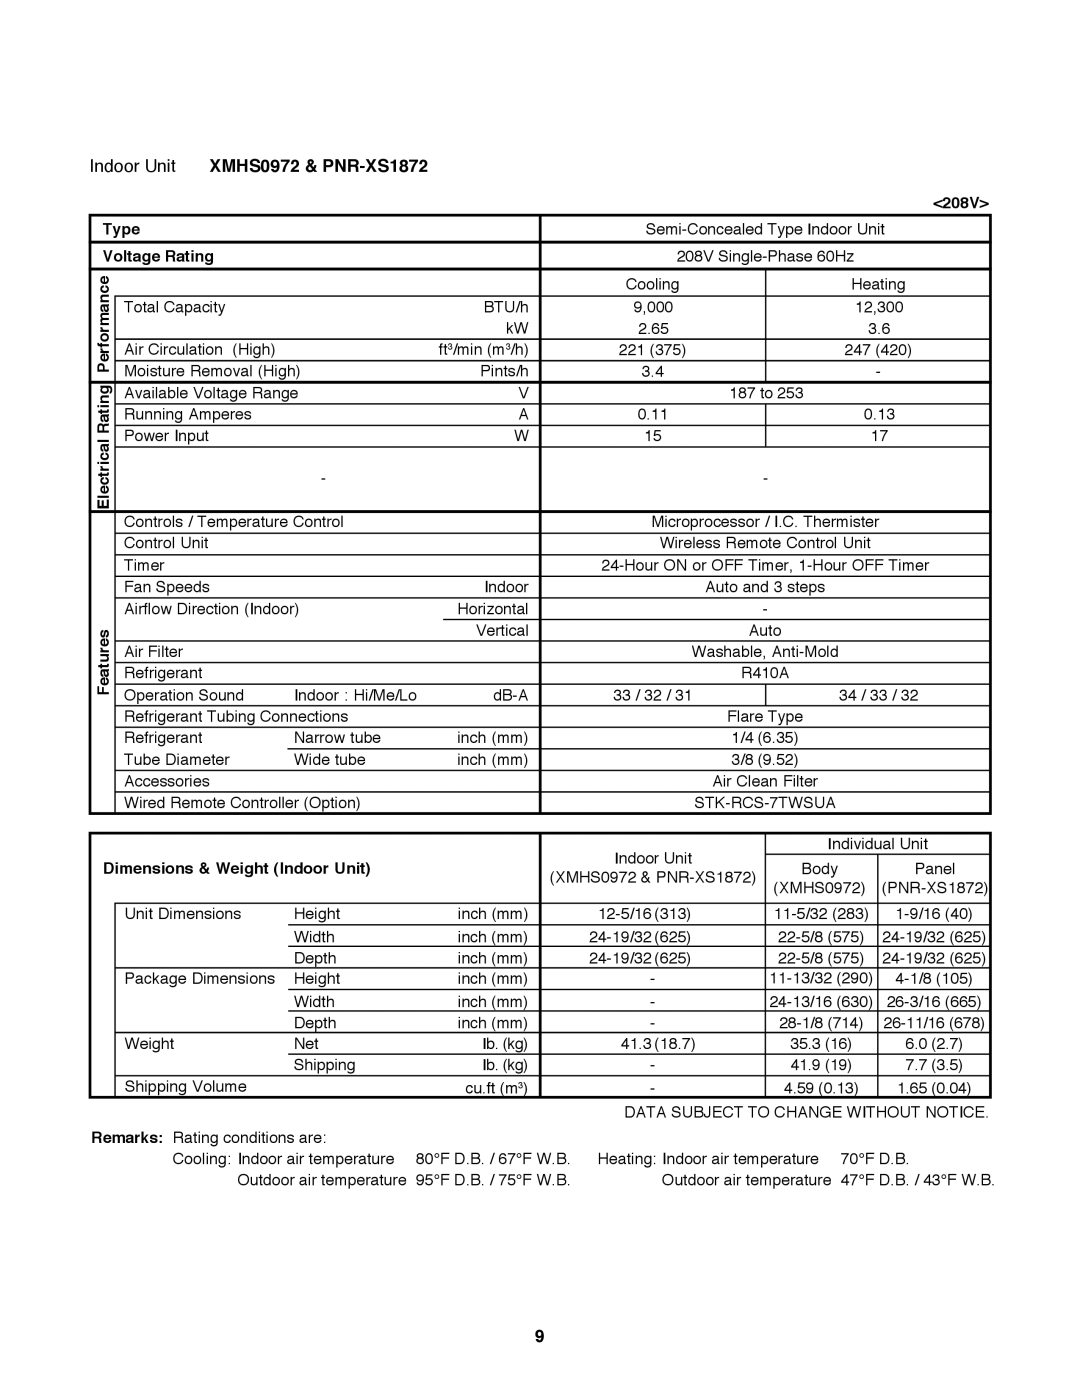 Sanyo XMHS1272 service manual XMHS0972 & PNR-XS1872, <208V>, Type, Voltage Rating, Dimensions & Weight Indoor Unit 